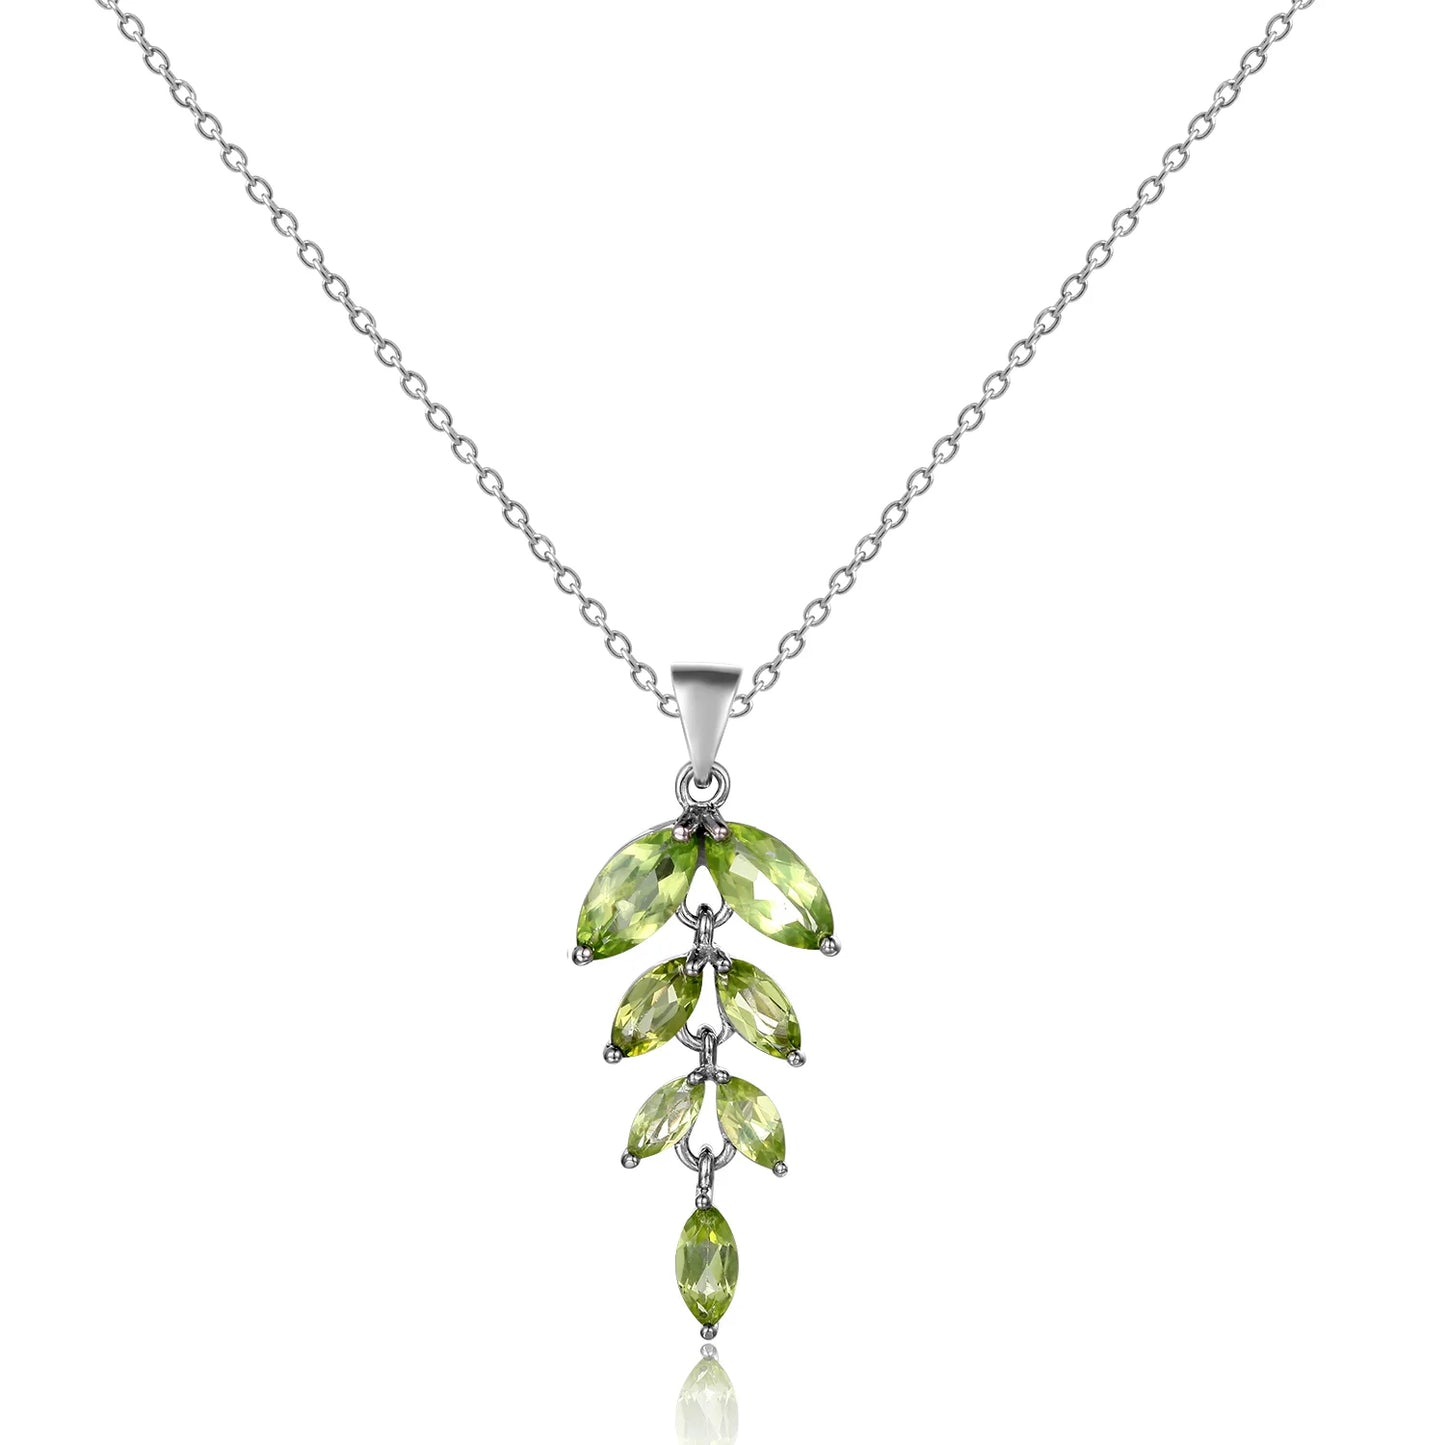 Gem's Ballet Olive Branch Peace Necklace Natural Black Garnet Gemstone Pendant Necklace in 925 Sterling Silver with 18" Chain Peridot